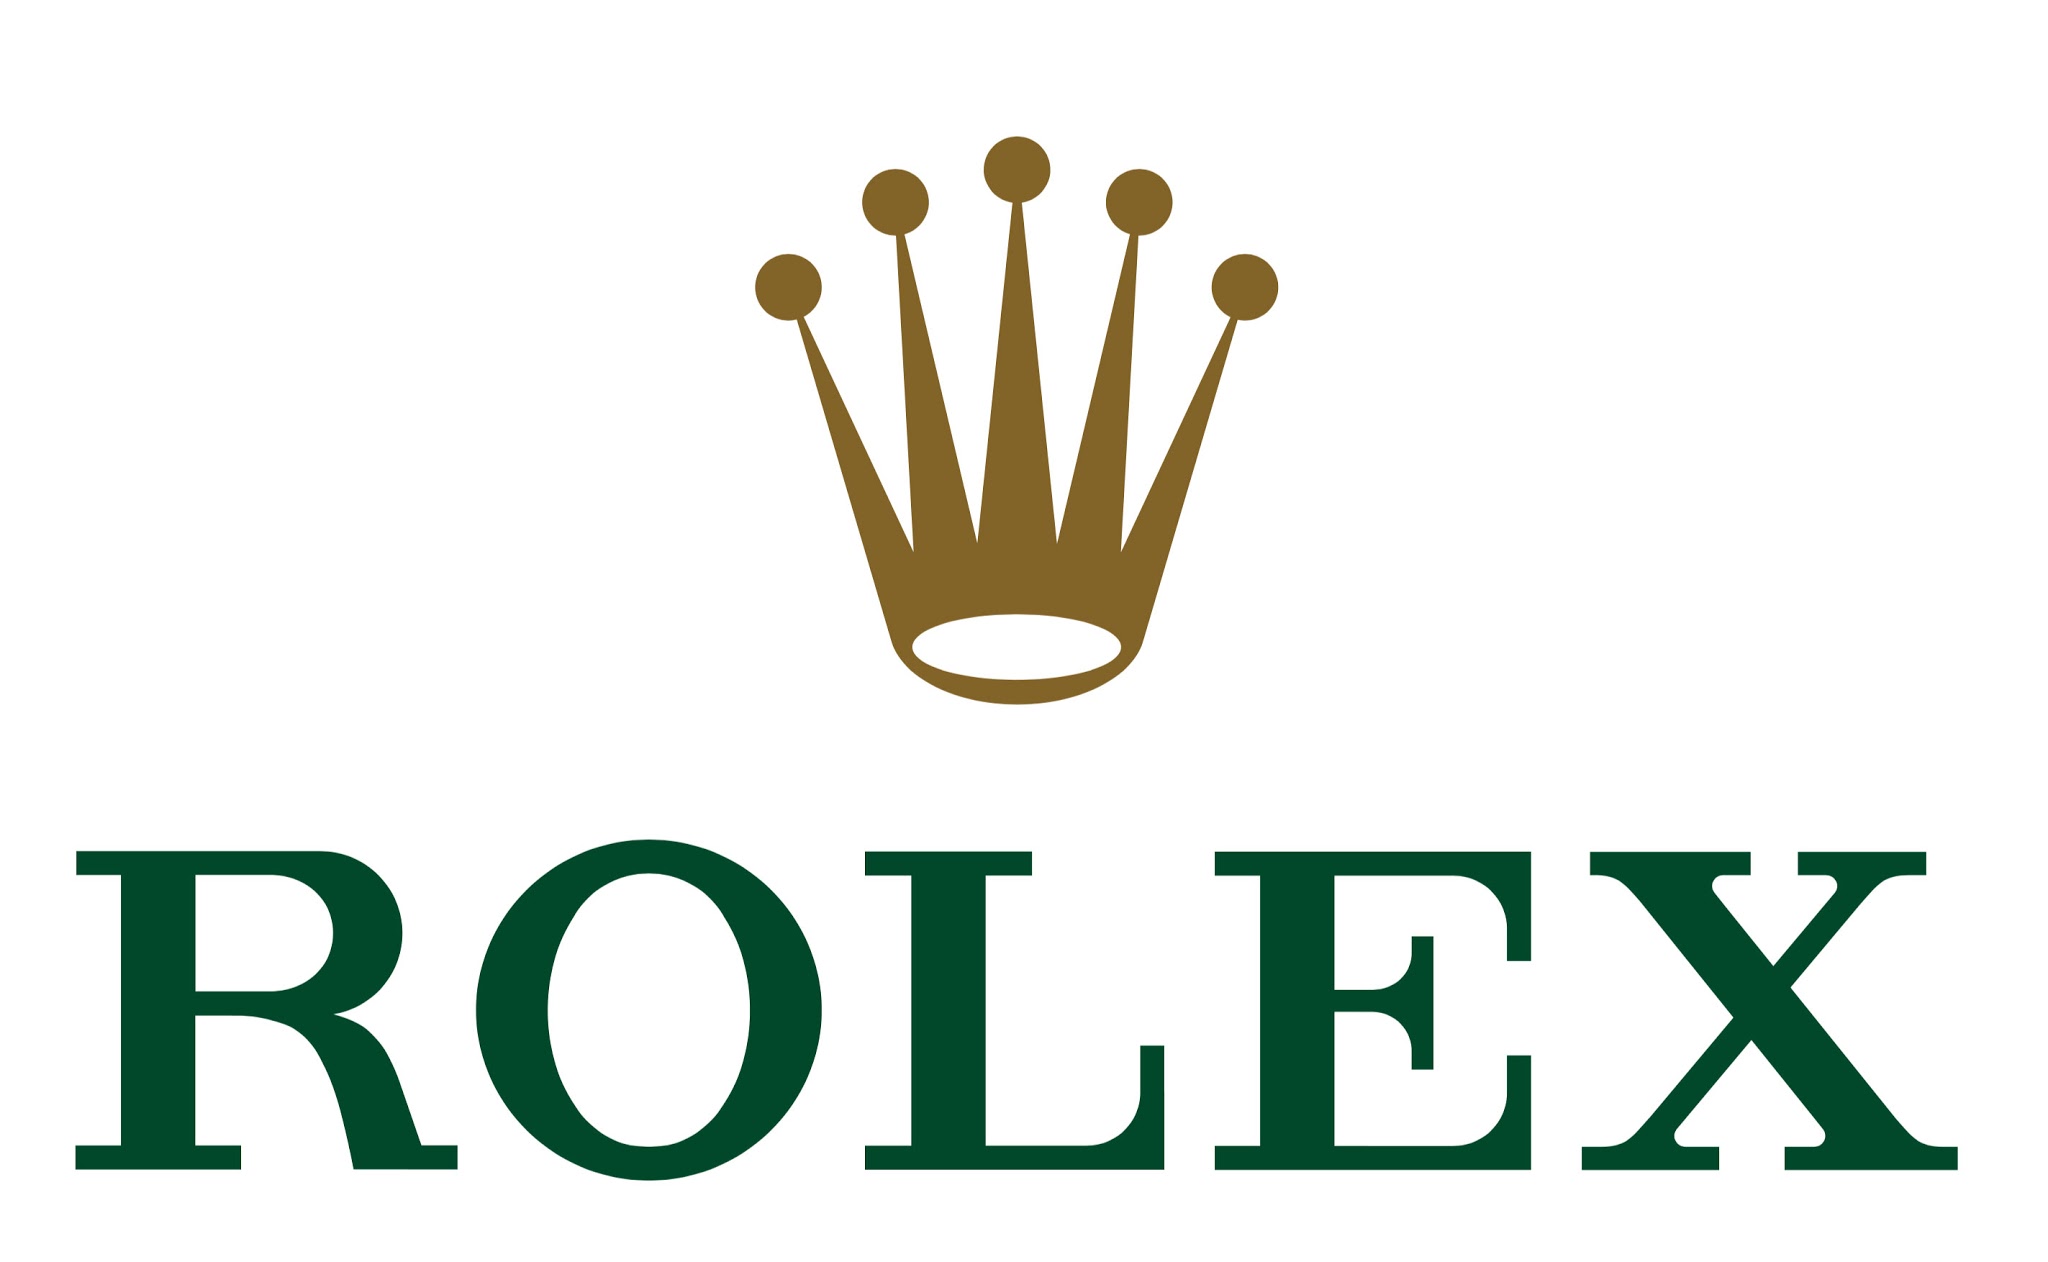 the rolex logo is shown in green and gold